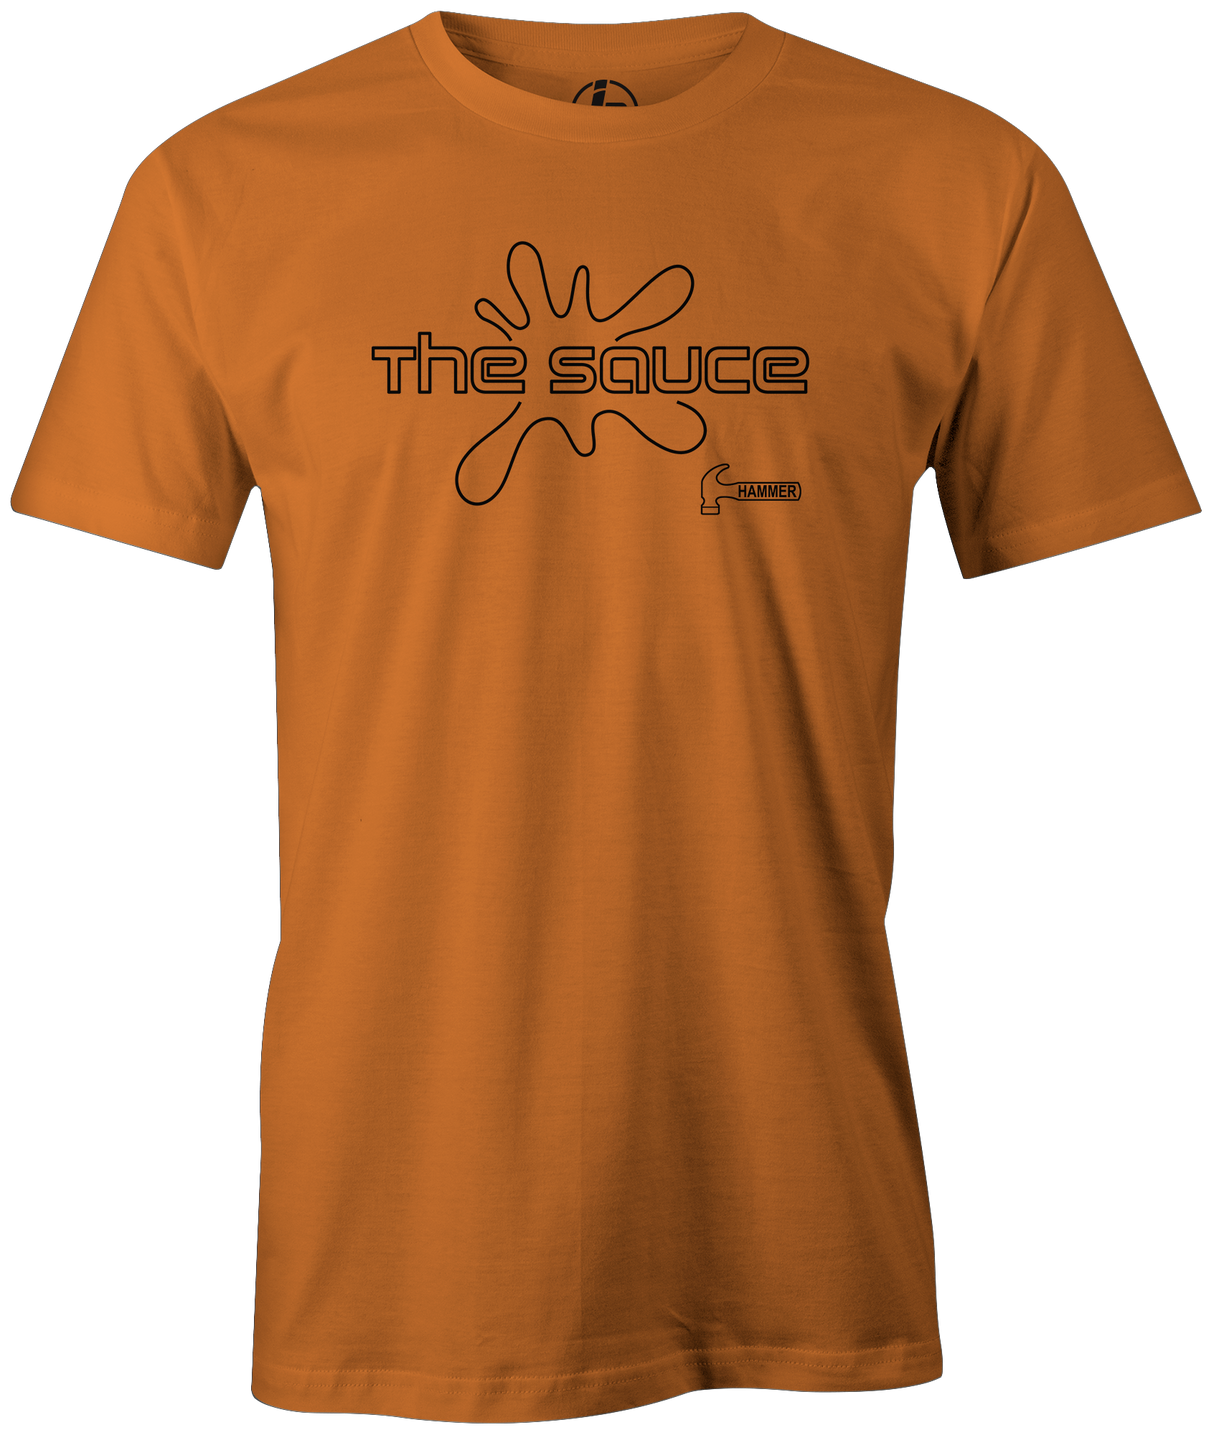 It's back! The Hammer Sauce was introduced in 2008 and has been re-released in 2019. Everyone performs better with Sauce! Pick up this tee and be saucy on the lanes. orange and black and navy hot